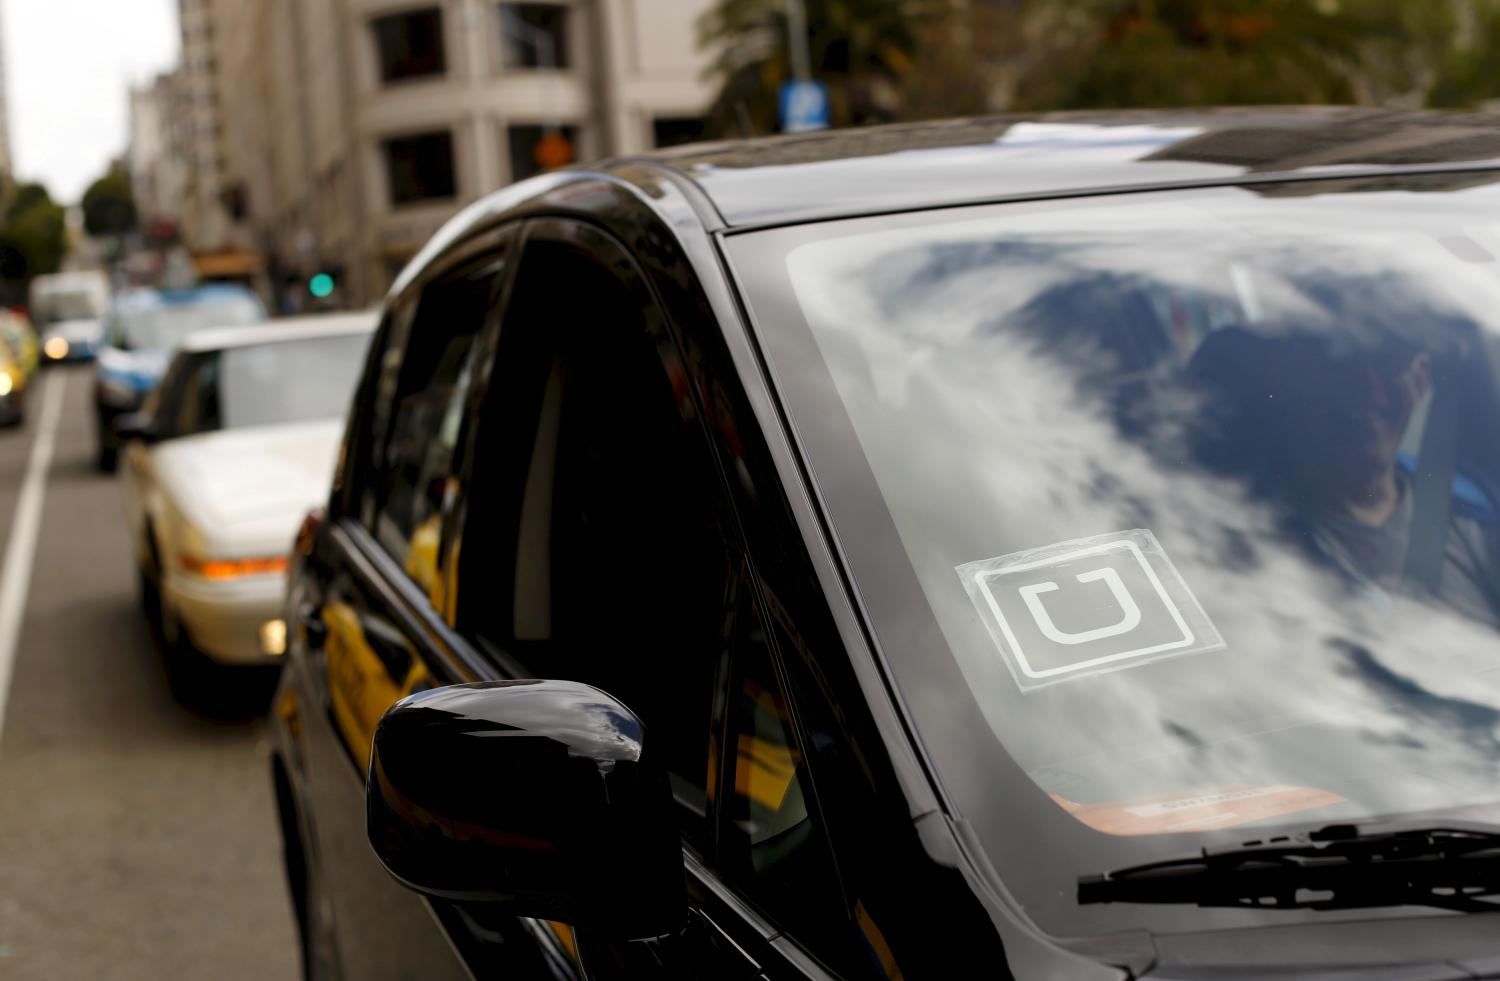 The Uber logo is seen on a vehicle near Union Square in San Francisco.